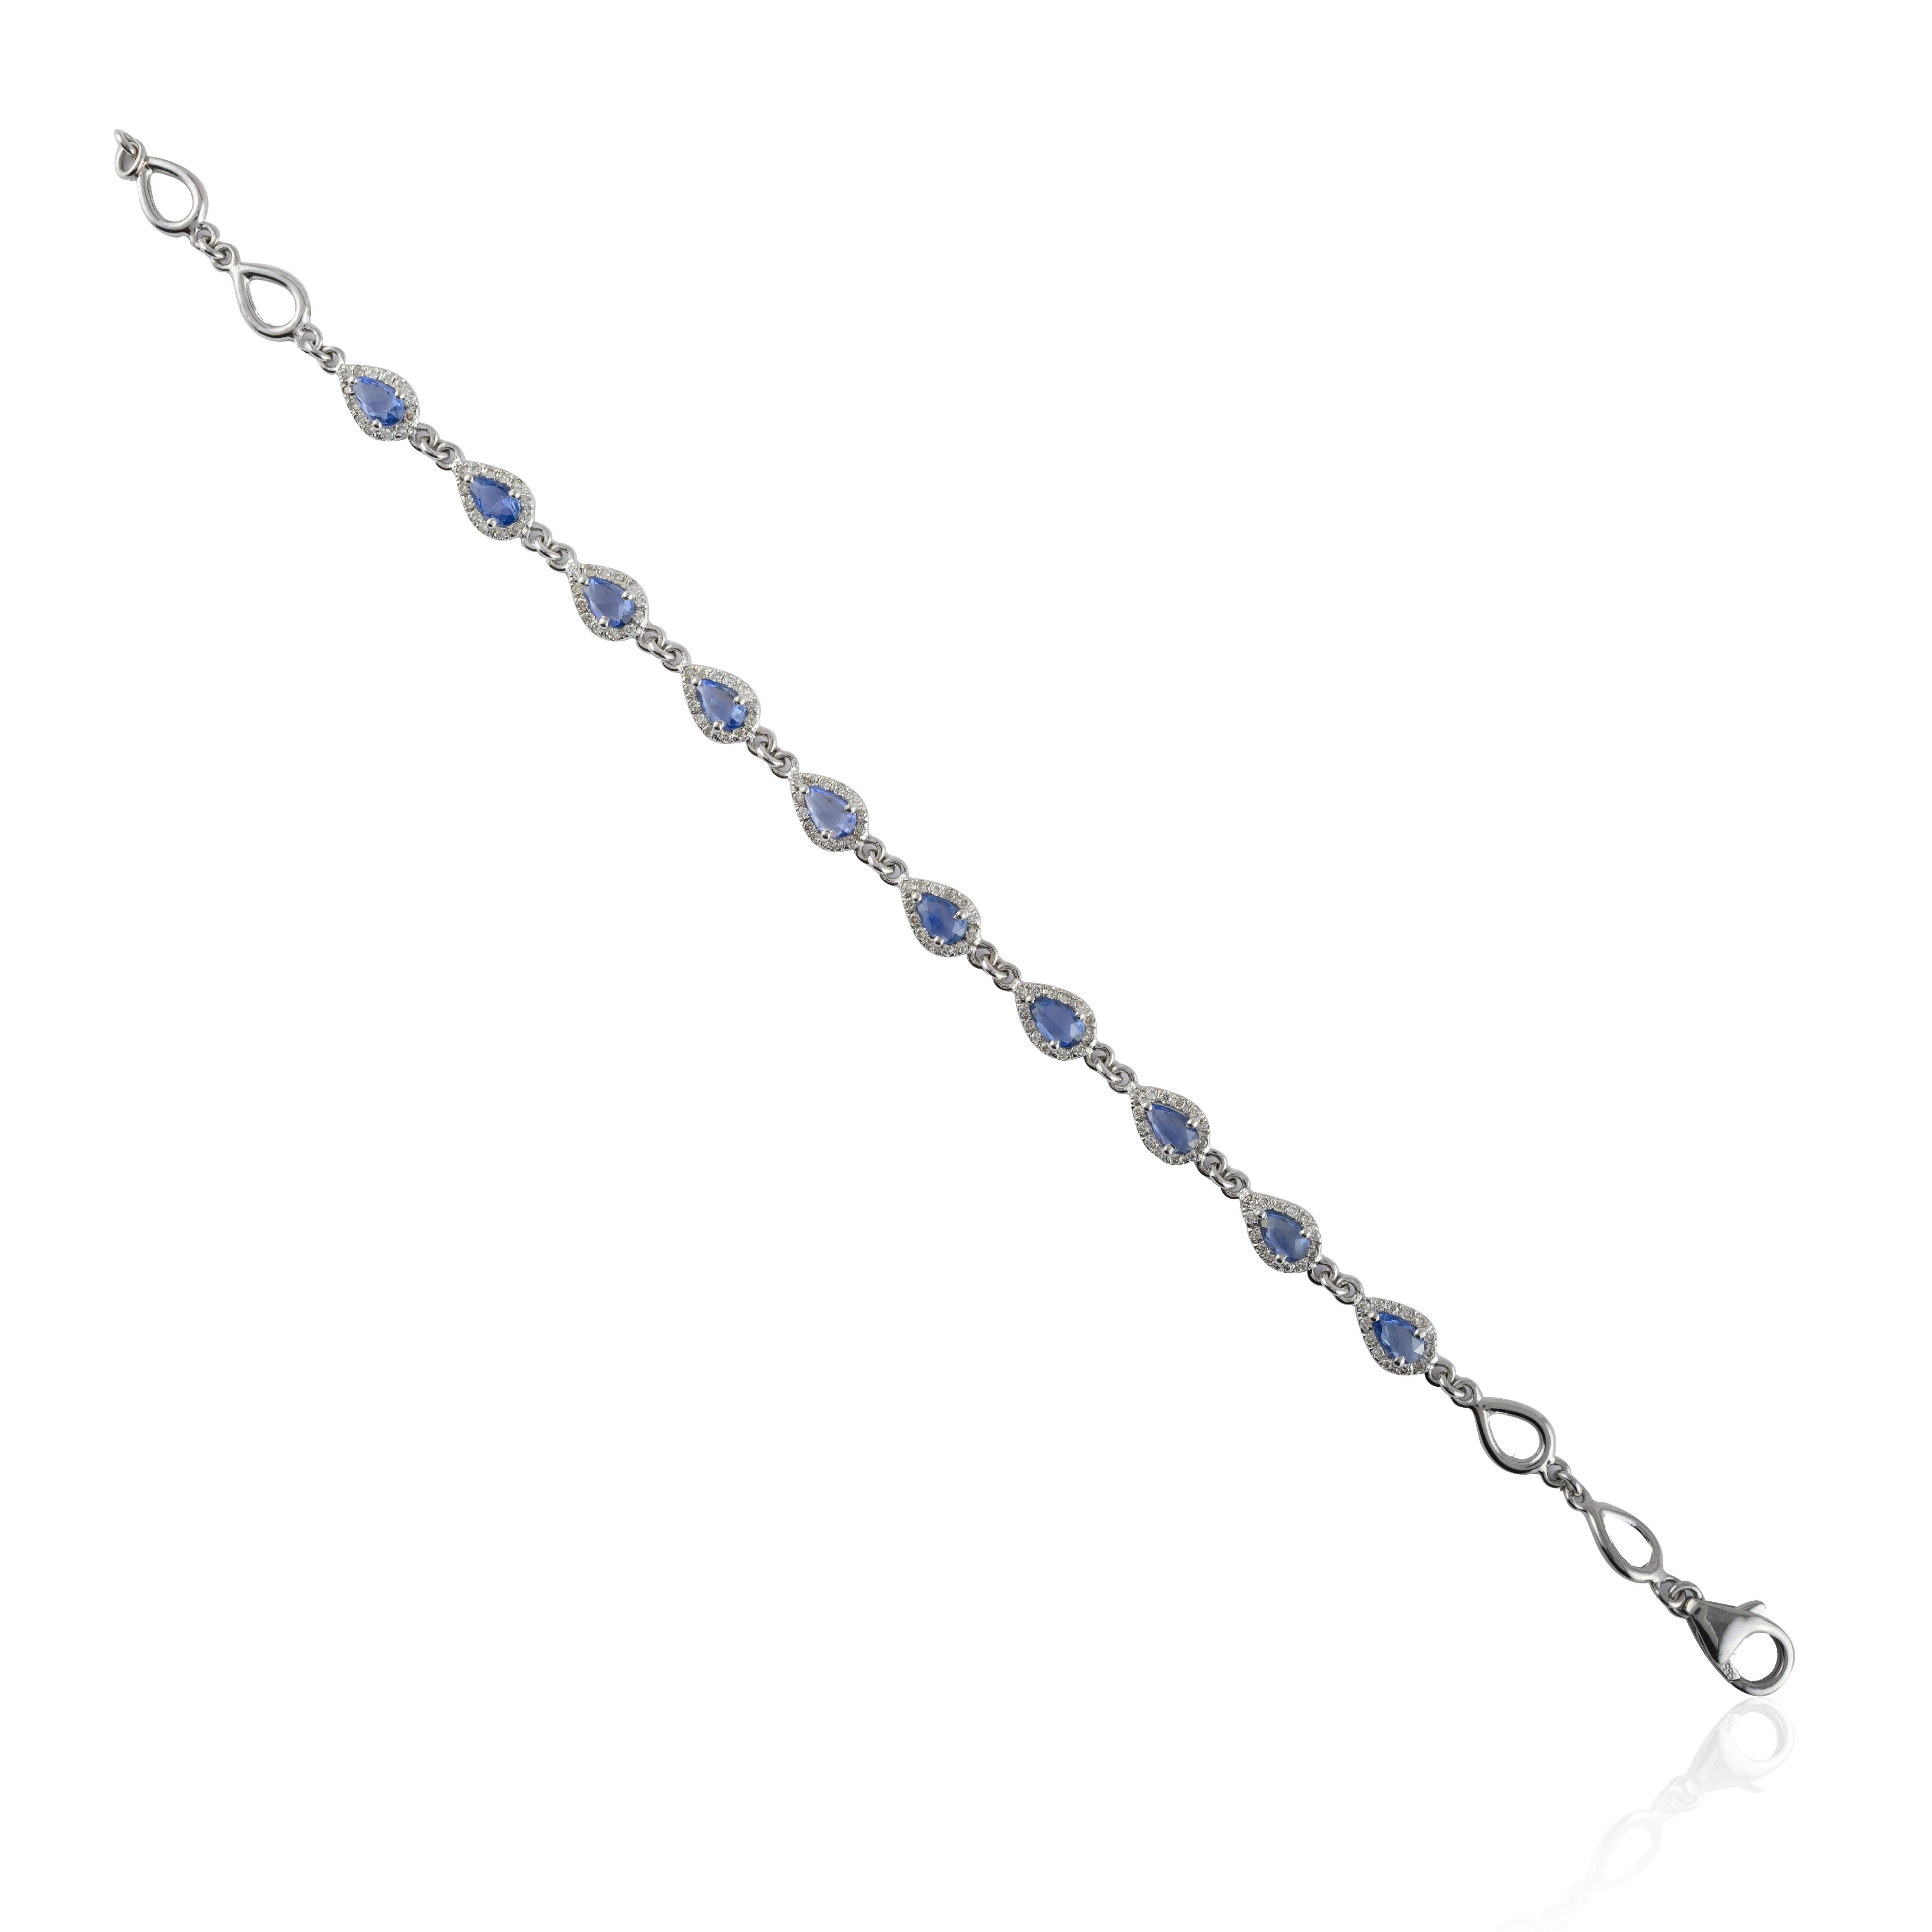 This Handmade Sapphire and Diamond Bracelet in 14K gold showcases 10 endlessly sparkling natural blue sapphire, weighing 2.06 carat. It measures 7 inches long in length. 
Sapphire stimulates concentration and reduces stress.
Designed with perfect